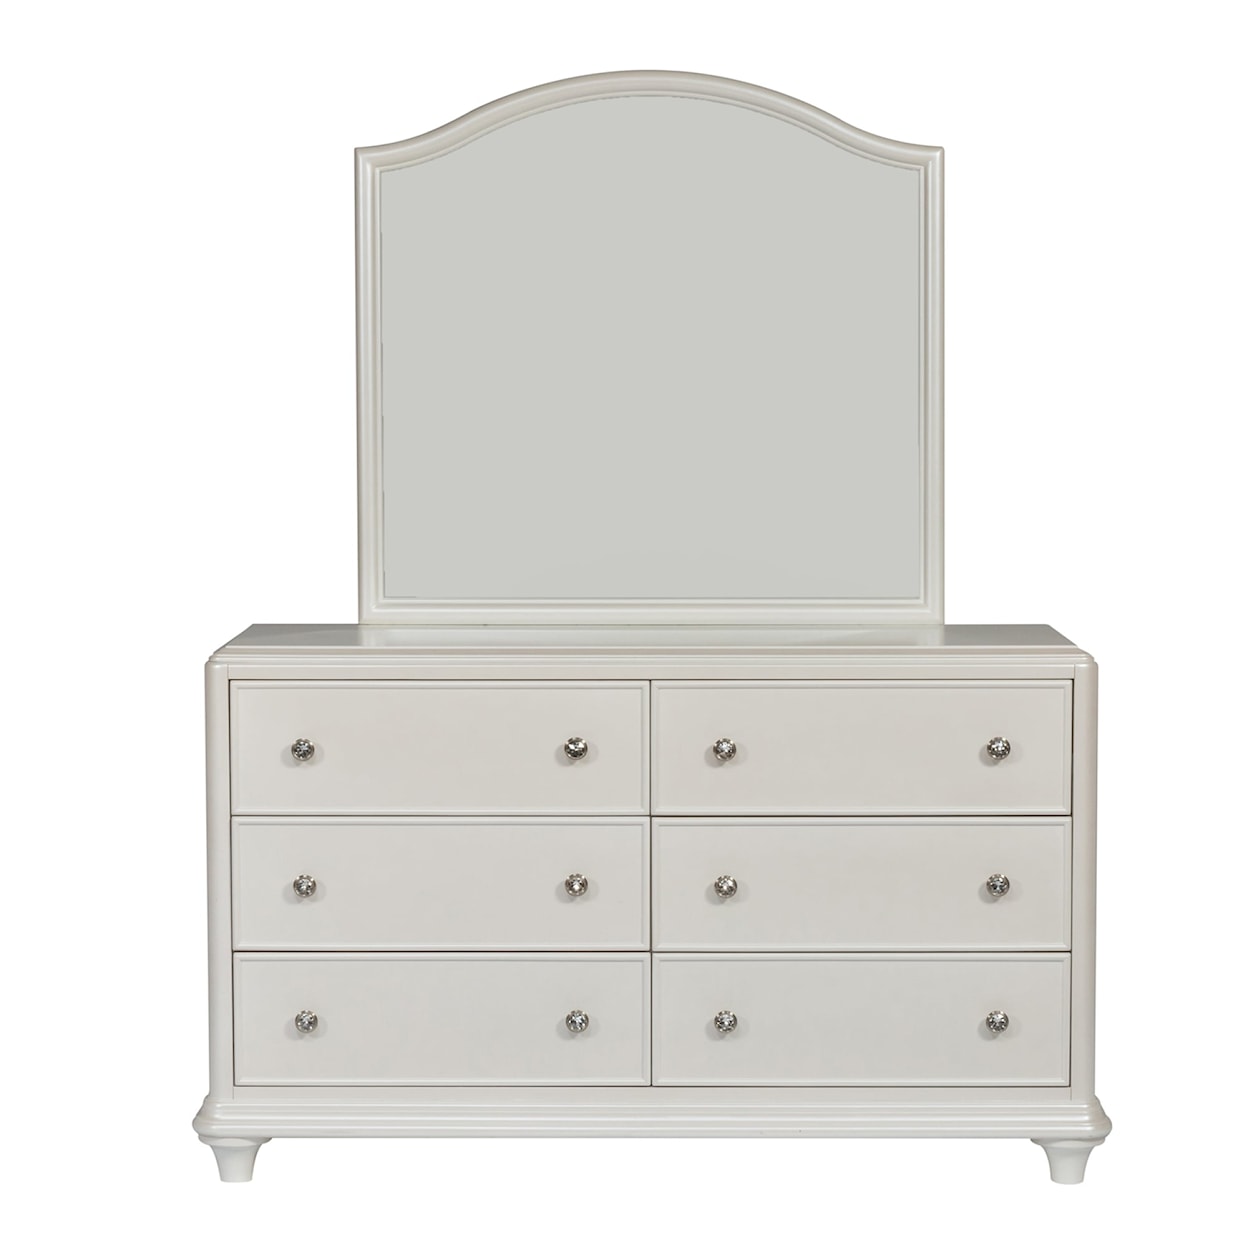 Libby Stardust 6-Drawer Dresser with Arched Mirror